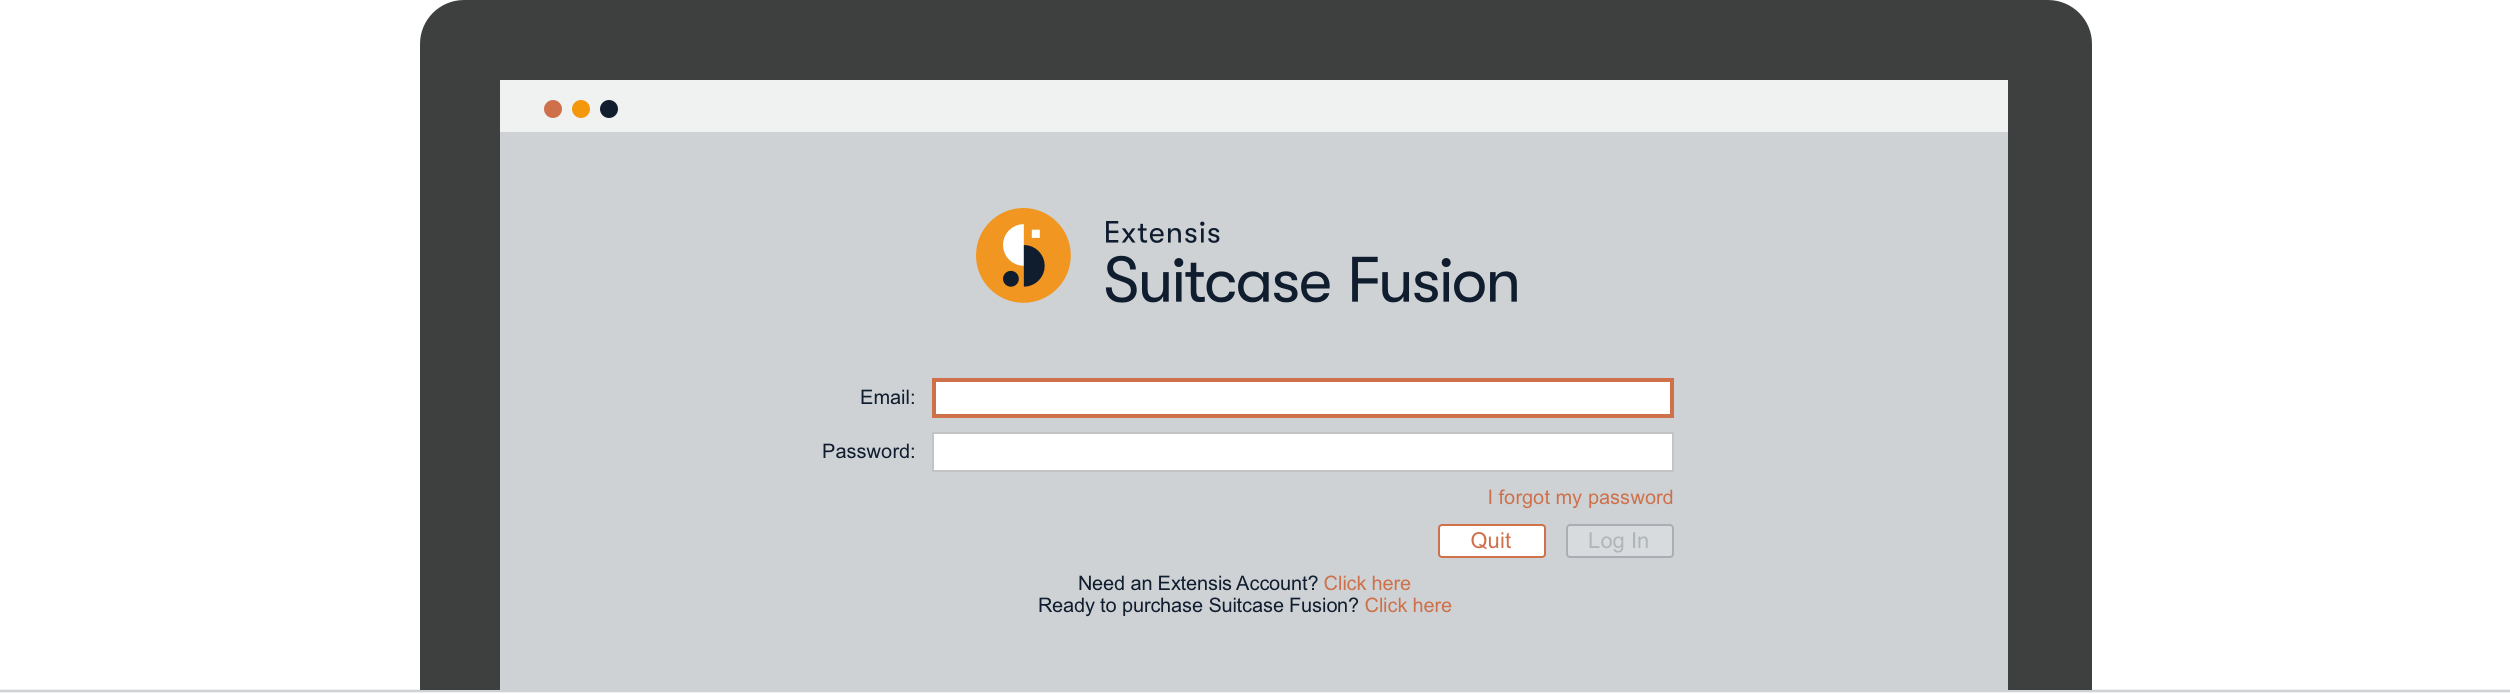 suitcase fusion 6 all plugins greyed out